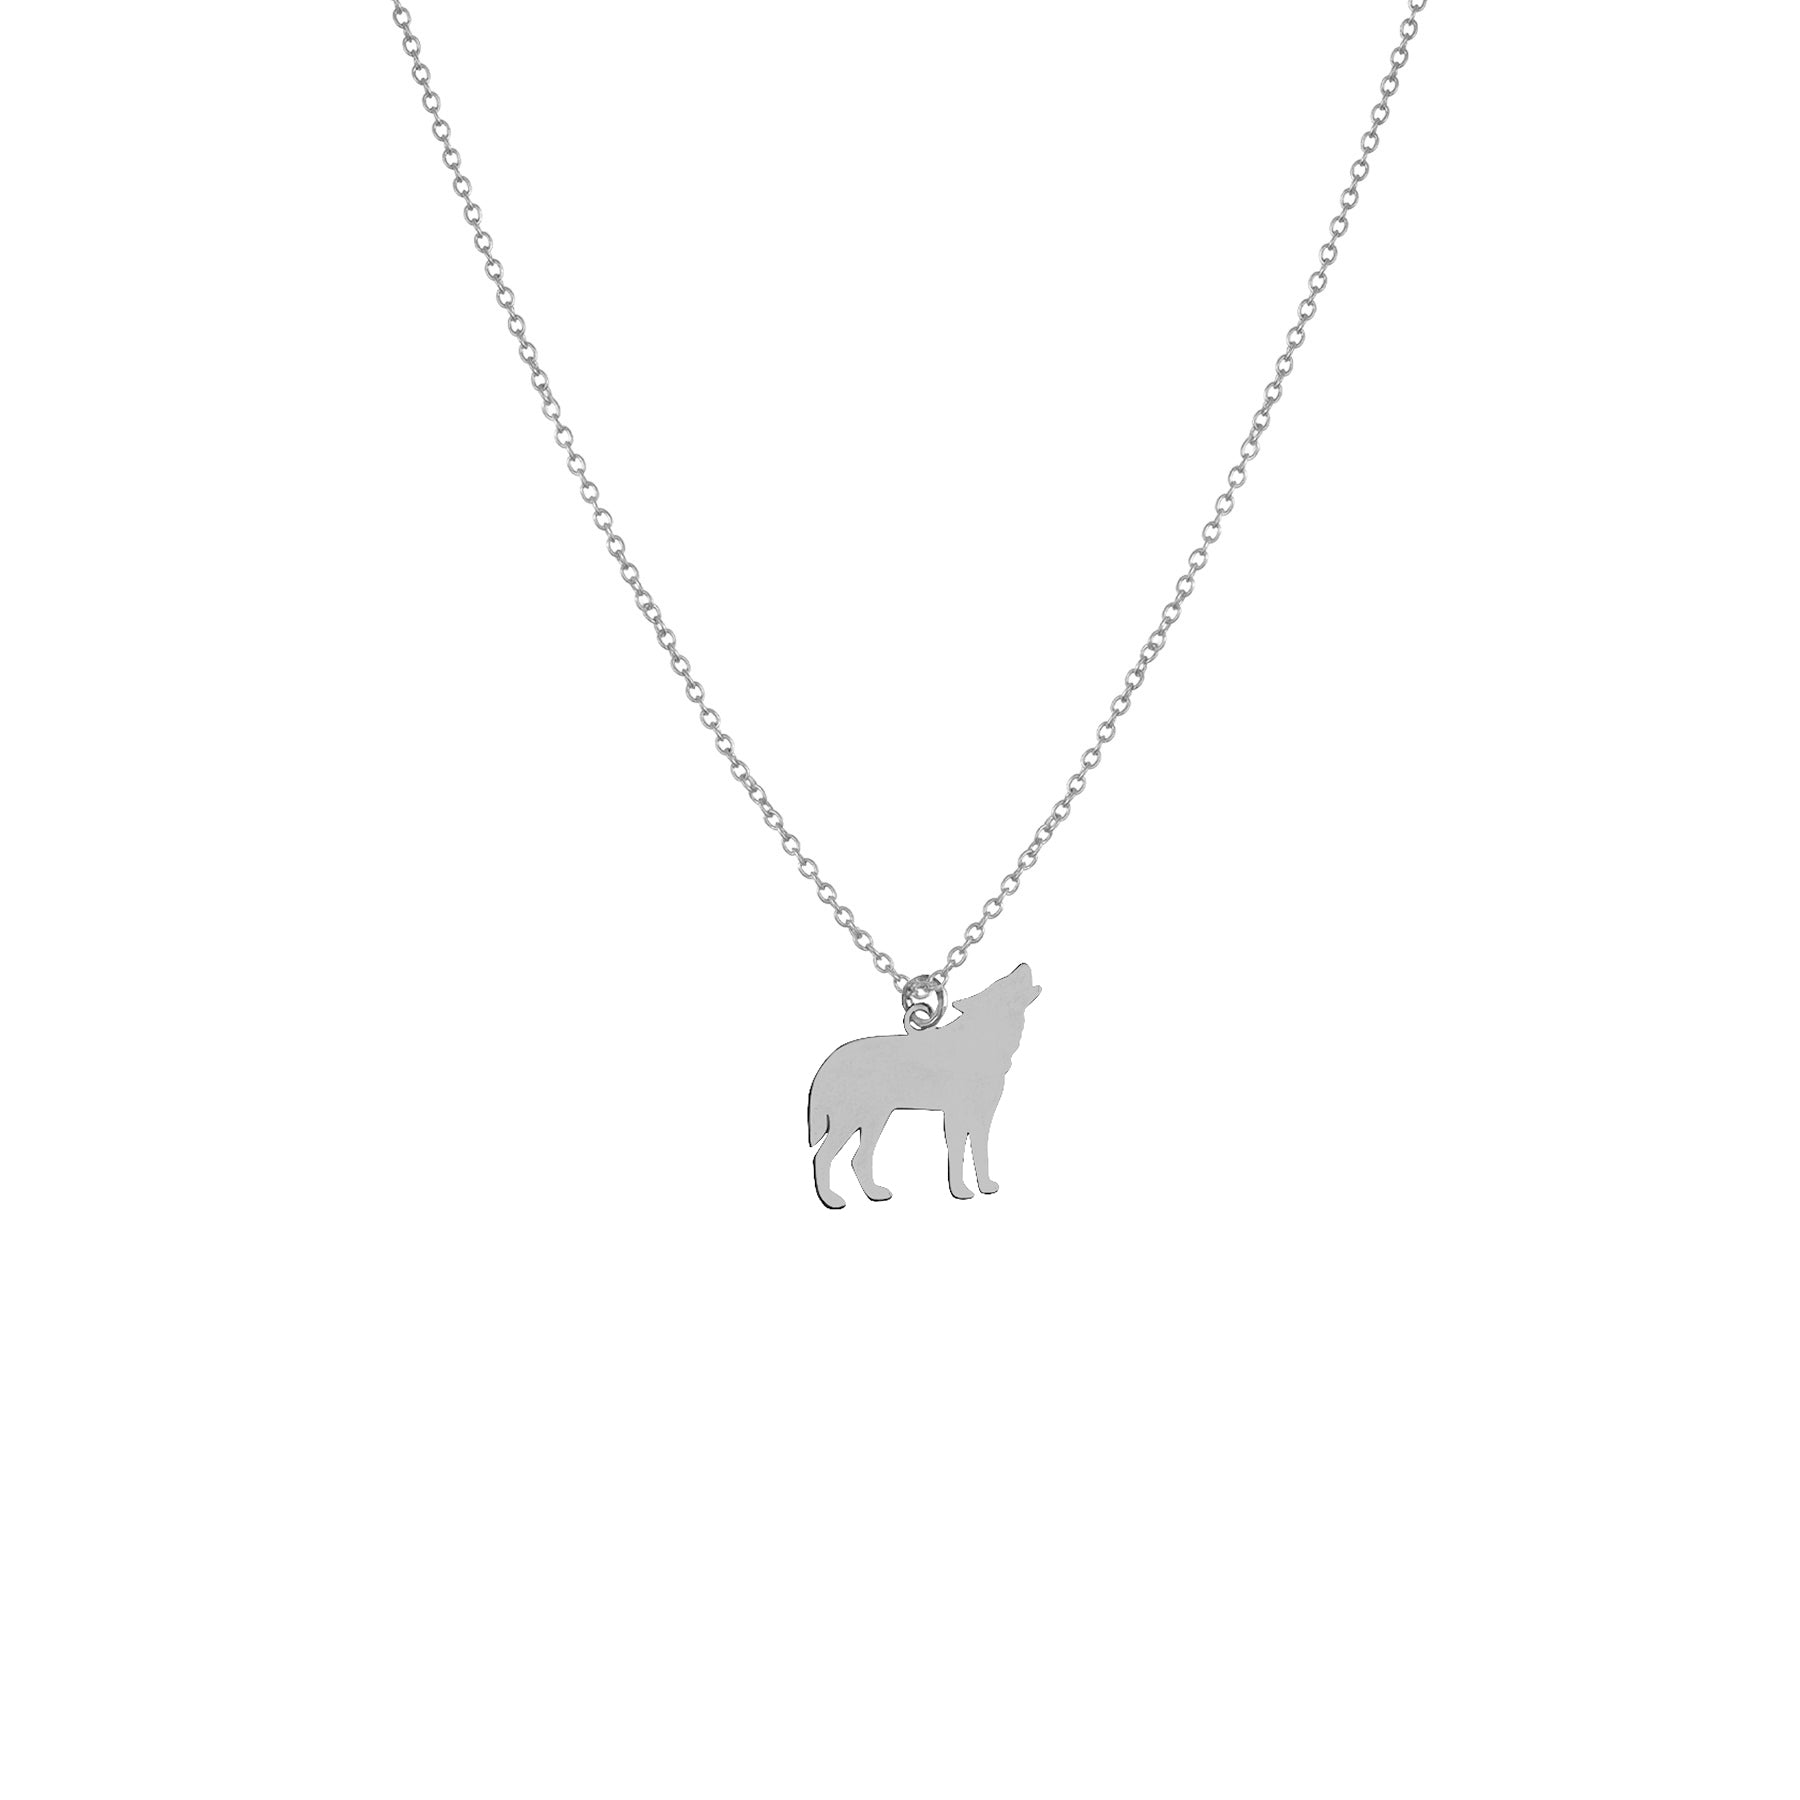 Collier loup argent - Lost & Faune